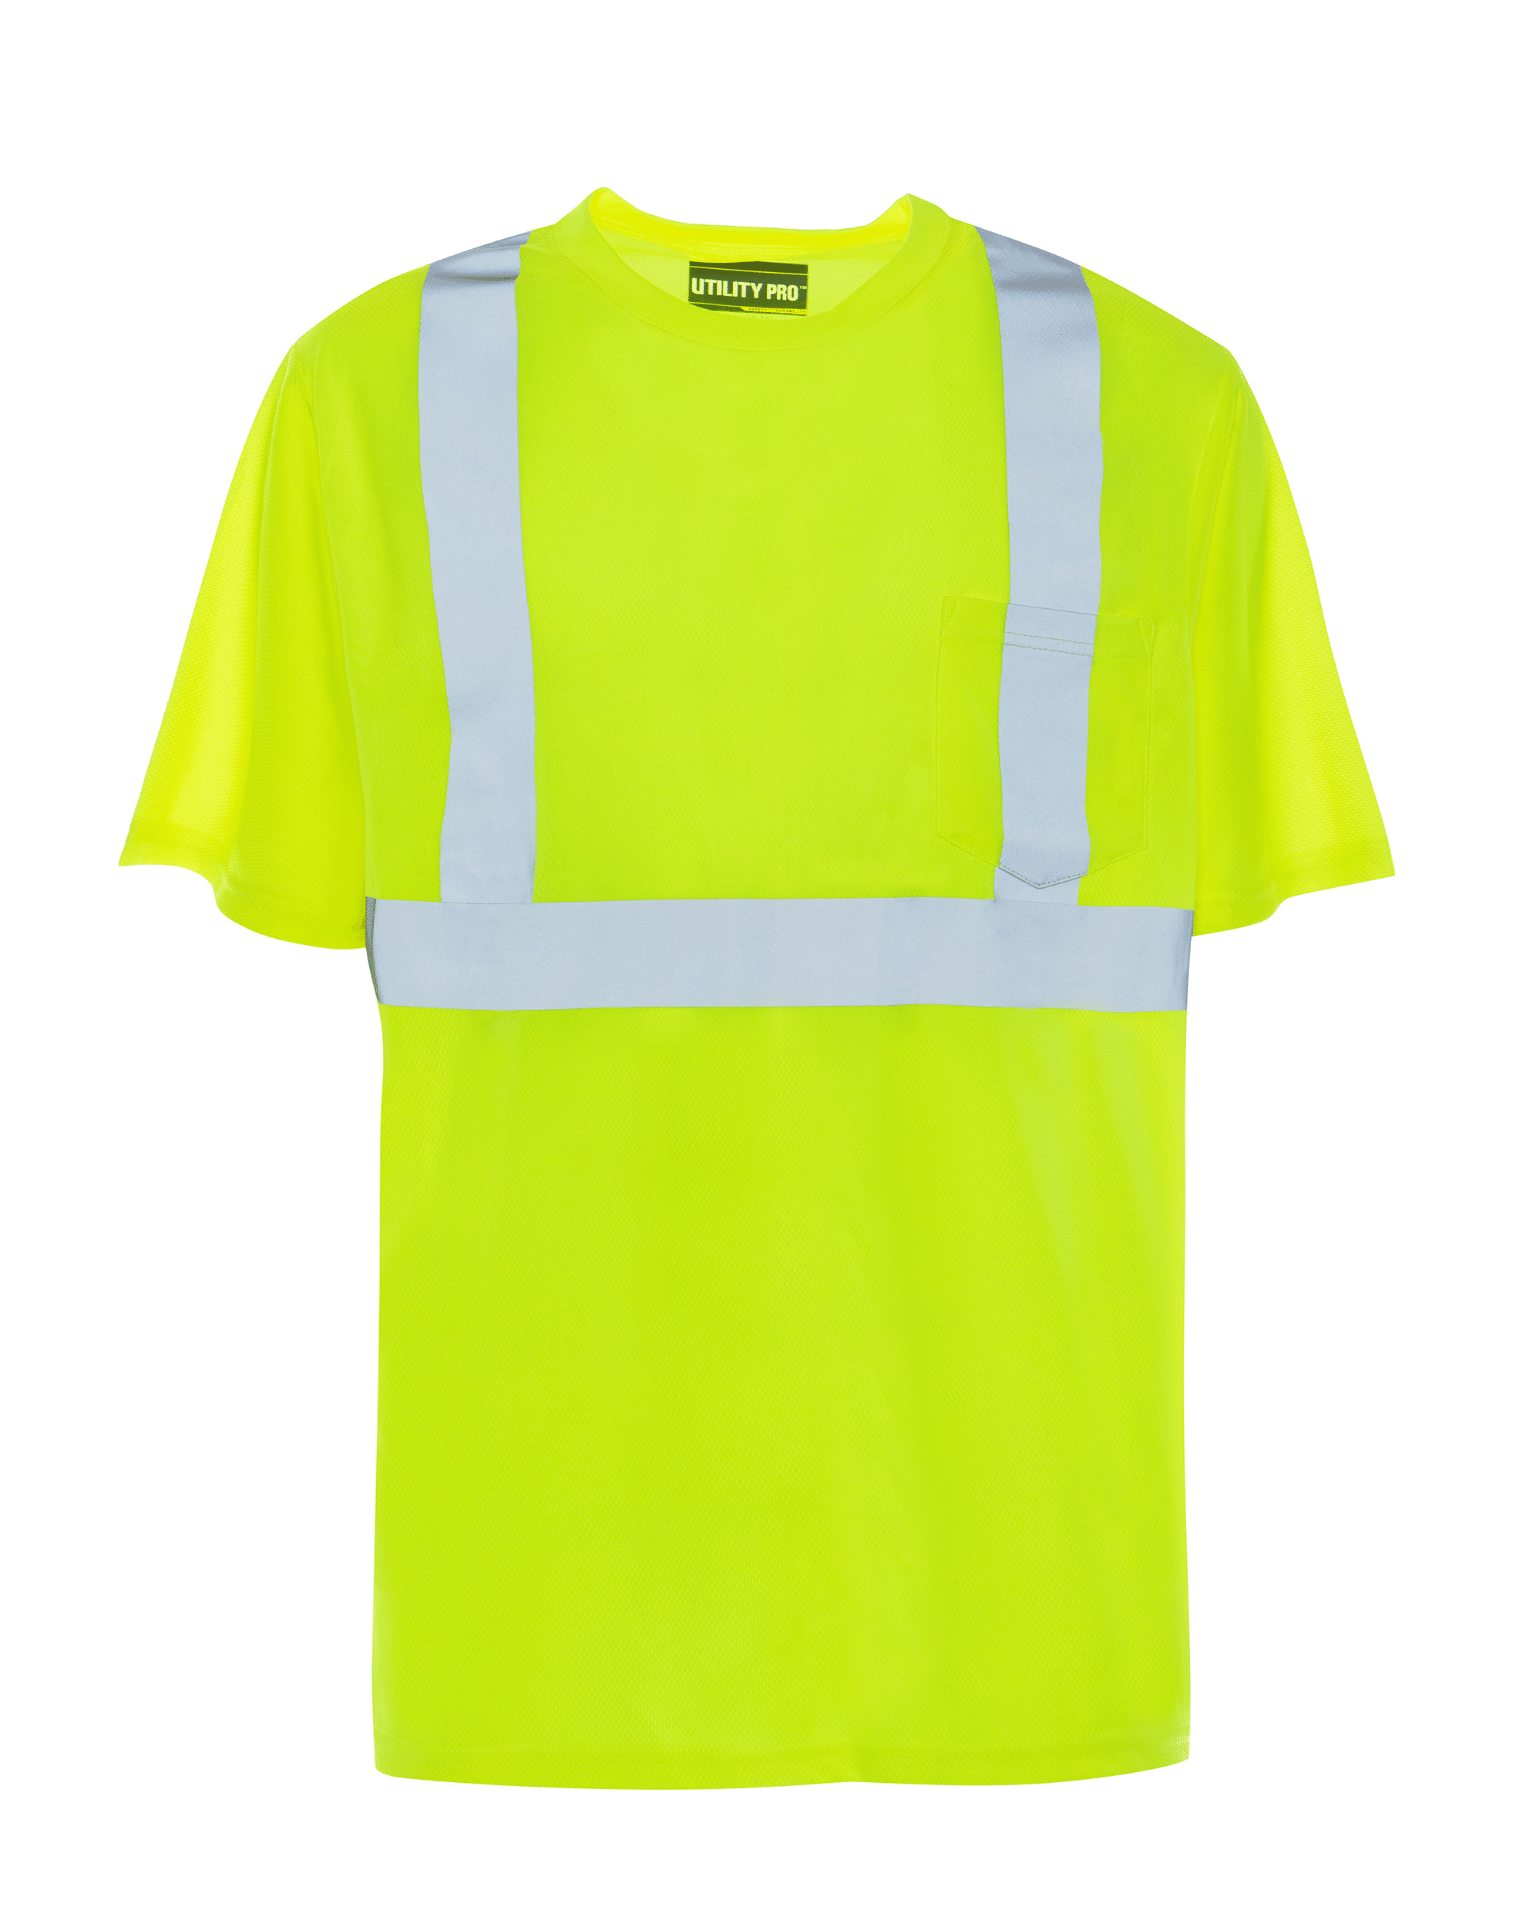 ANSI Class 2 High Visibility breathable fabric liquid and stain repellent short sleeve t-shirt by Utility Pro